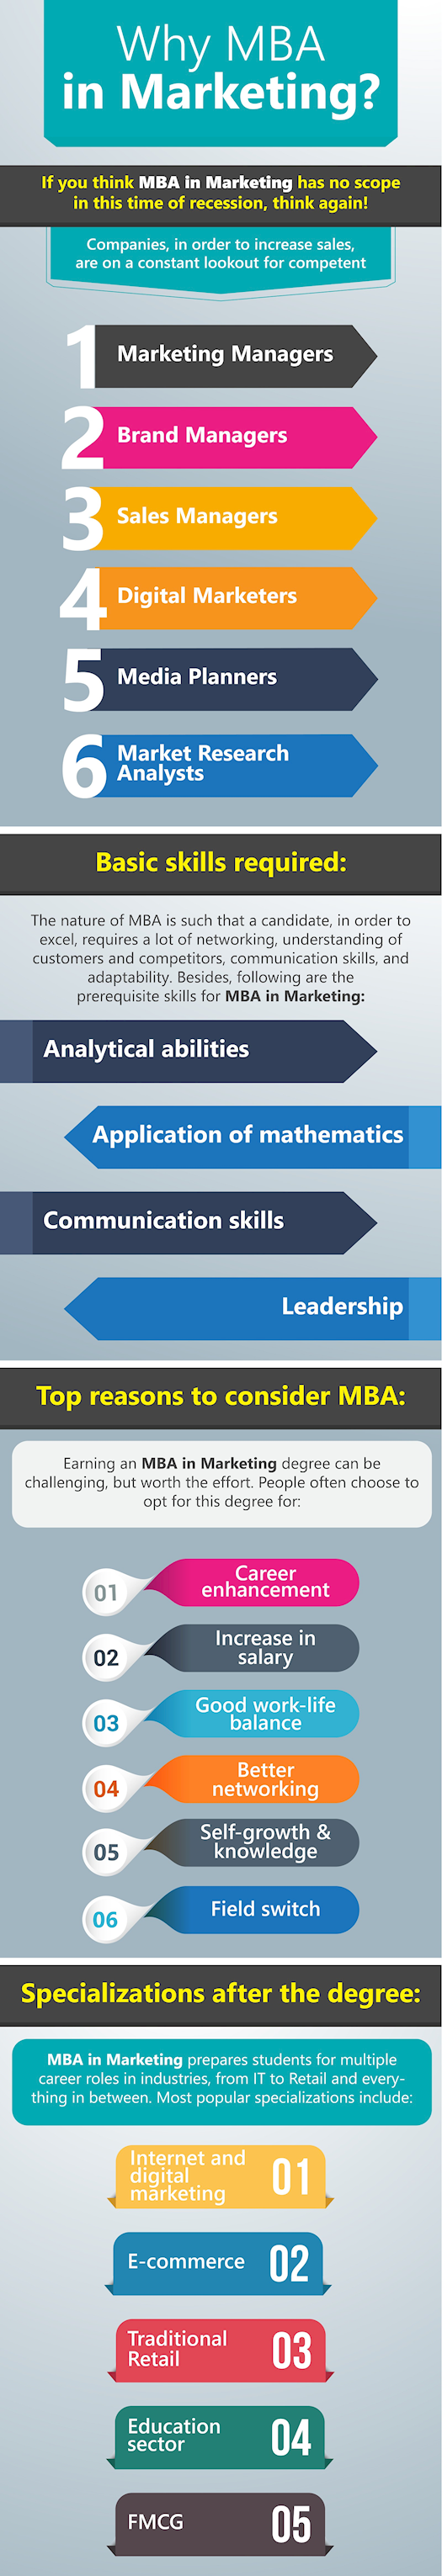 Why MBA in Marketing?